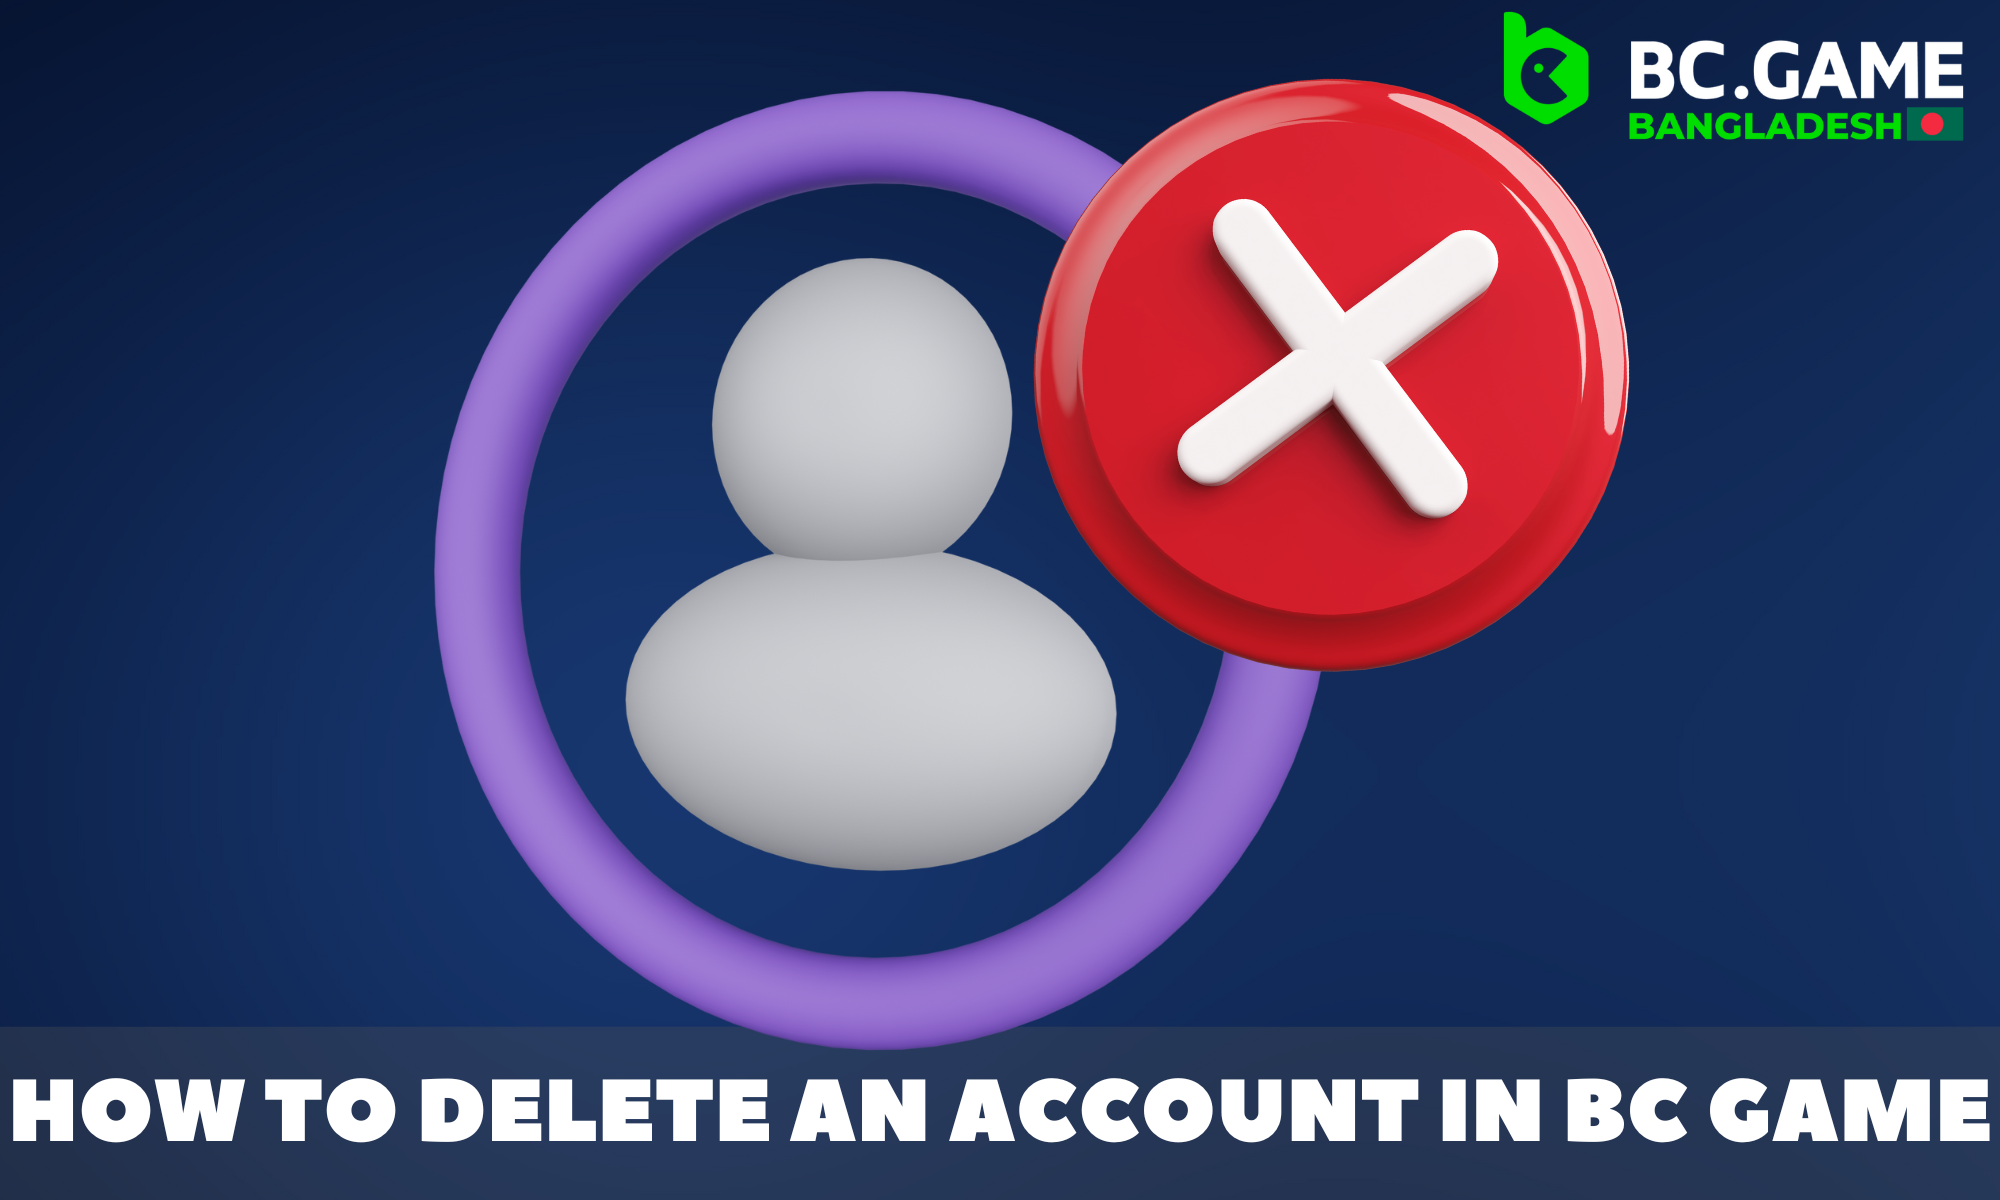 A few steps on how to delete your account in BC Game